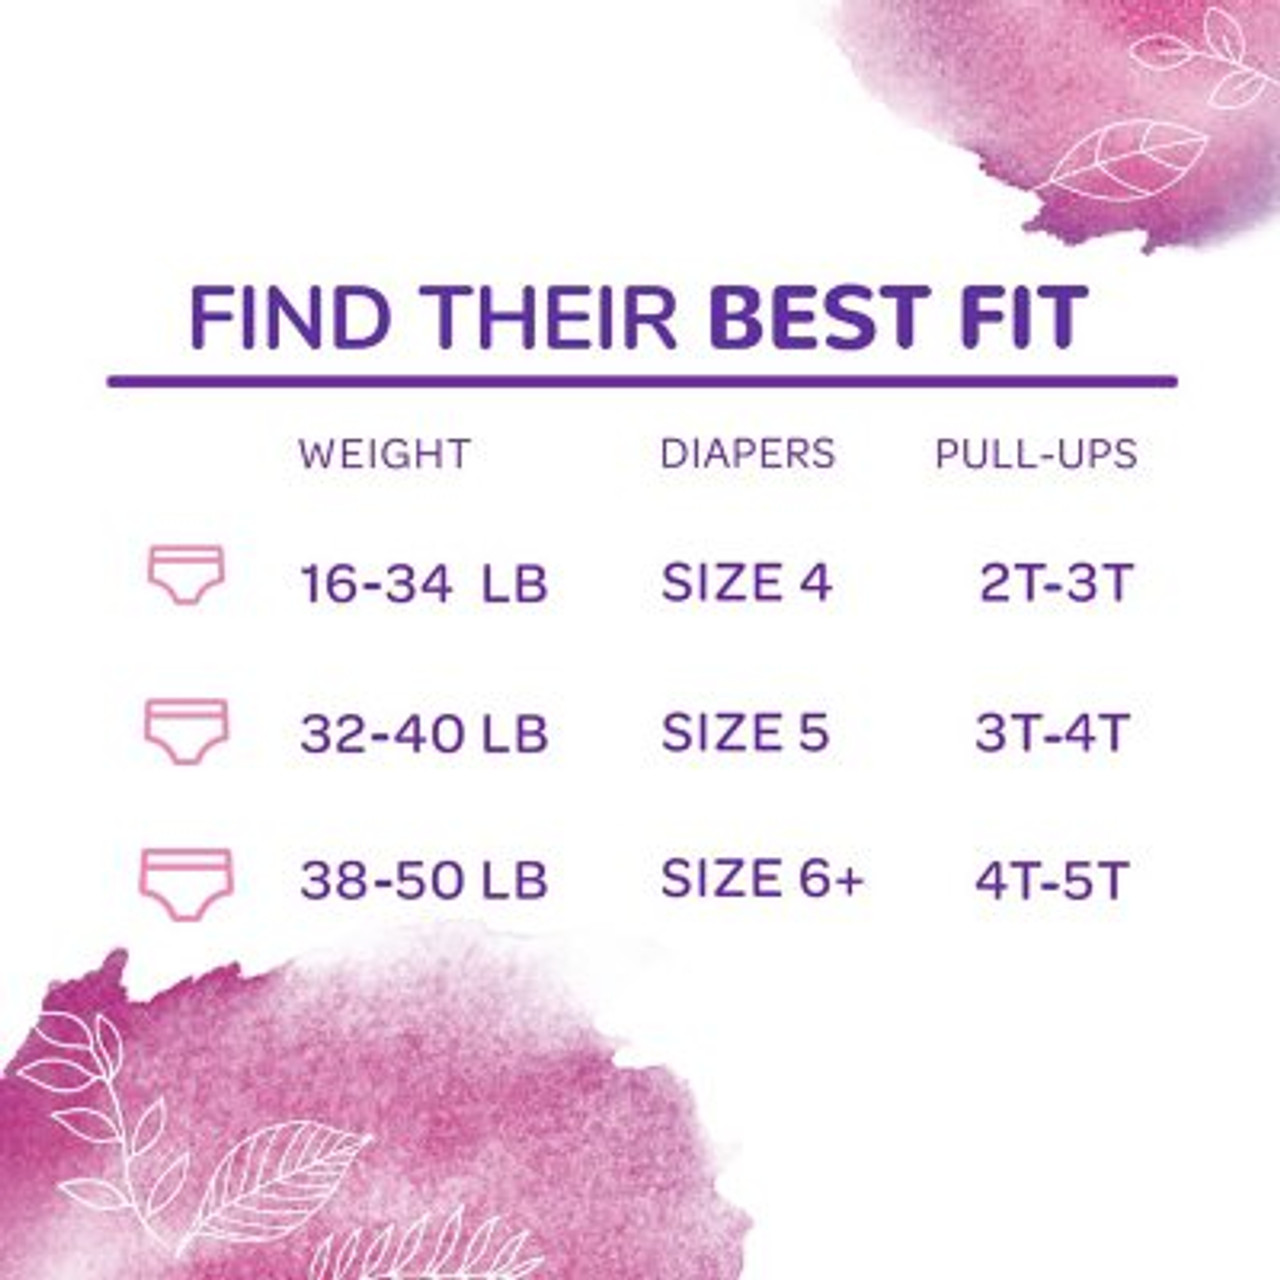 Huggies Pull-Ups New Leaf Training Underwear for Girls 3T-4T - 96 ct. (32-40 lbs) - *Pre-Order